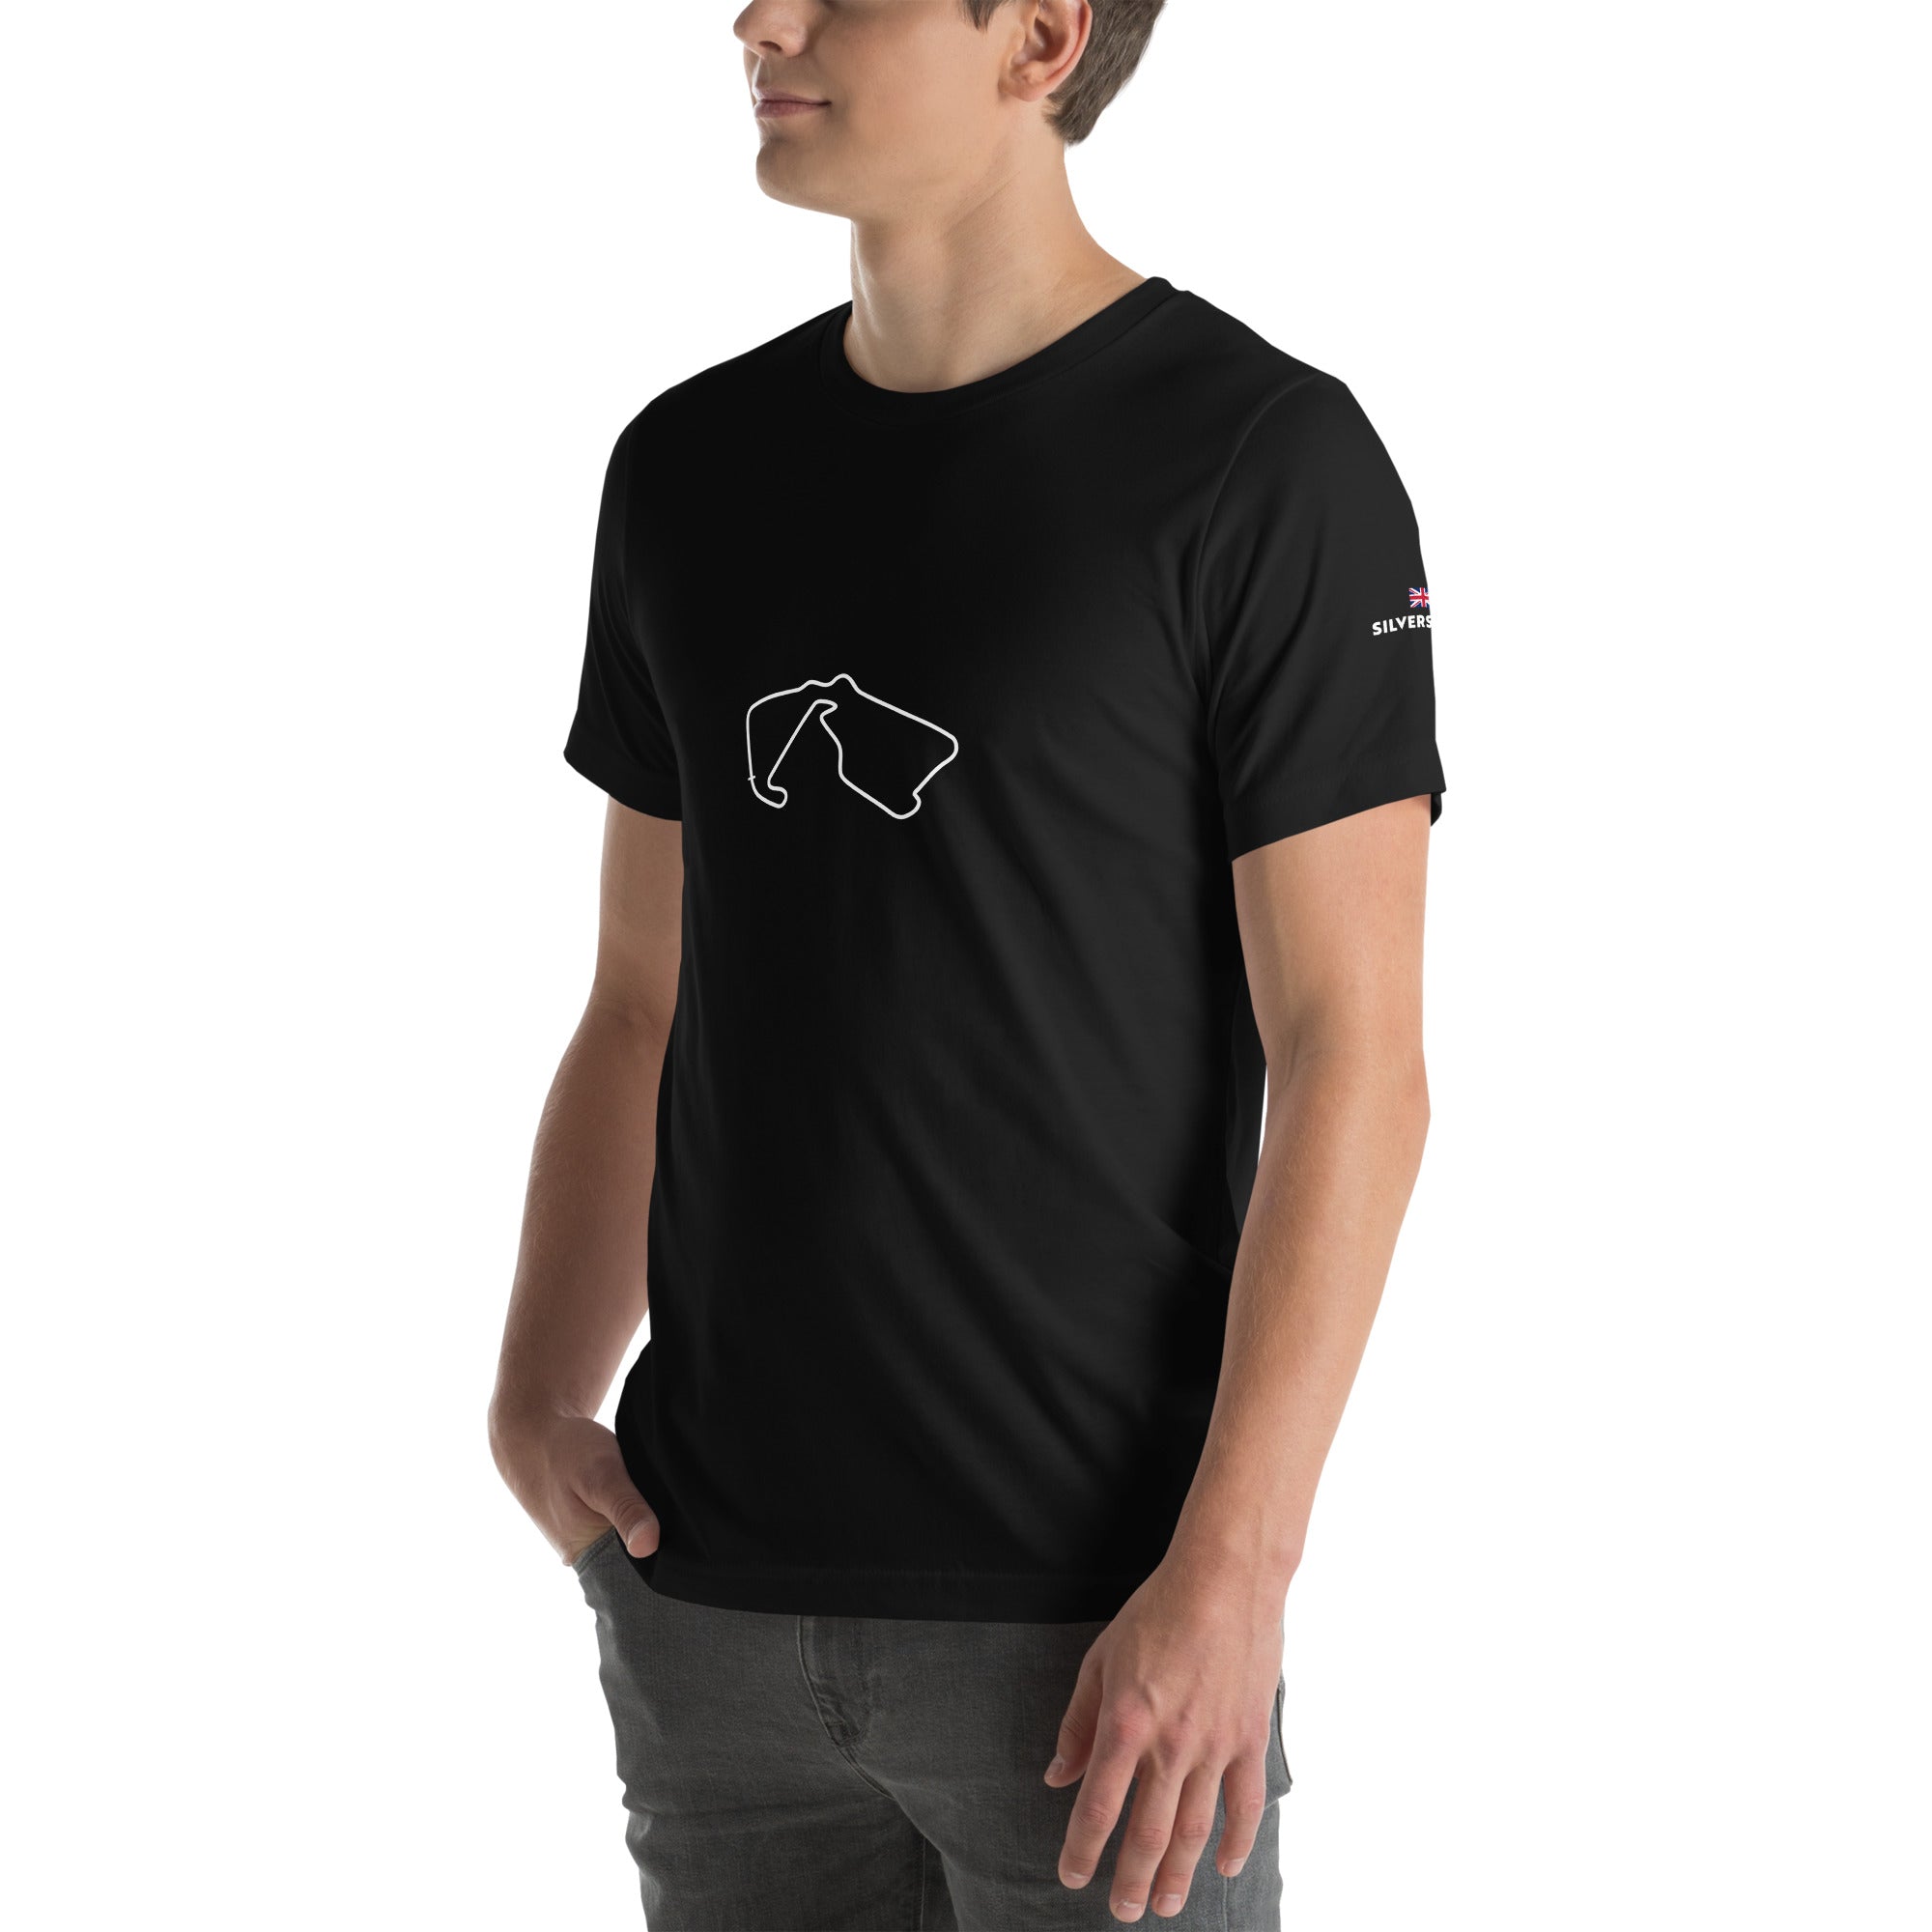 Silverstone: F1 Historic Circuit - Unisex T-Shirt black front side